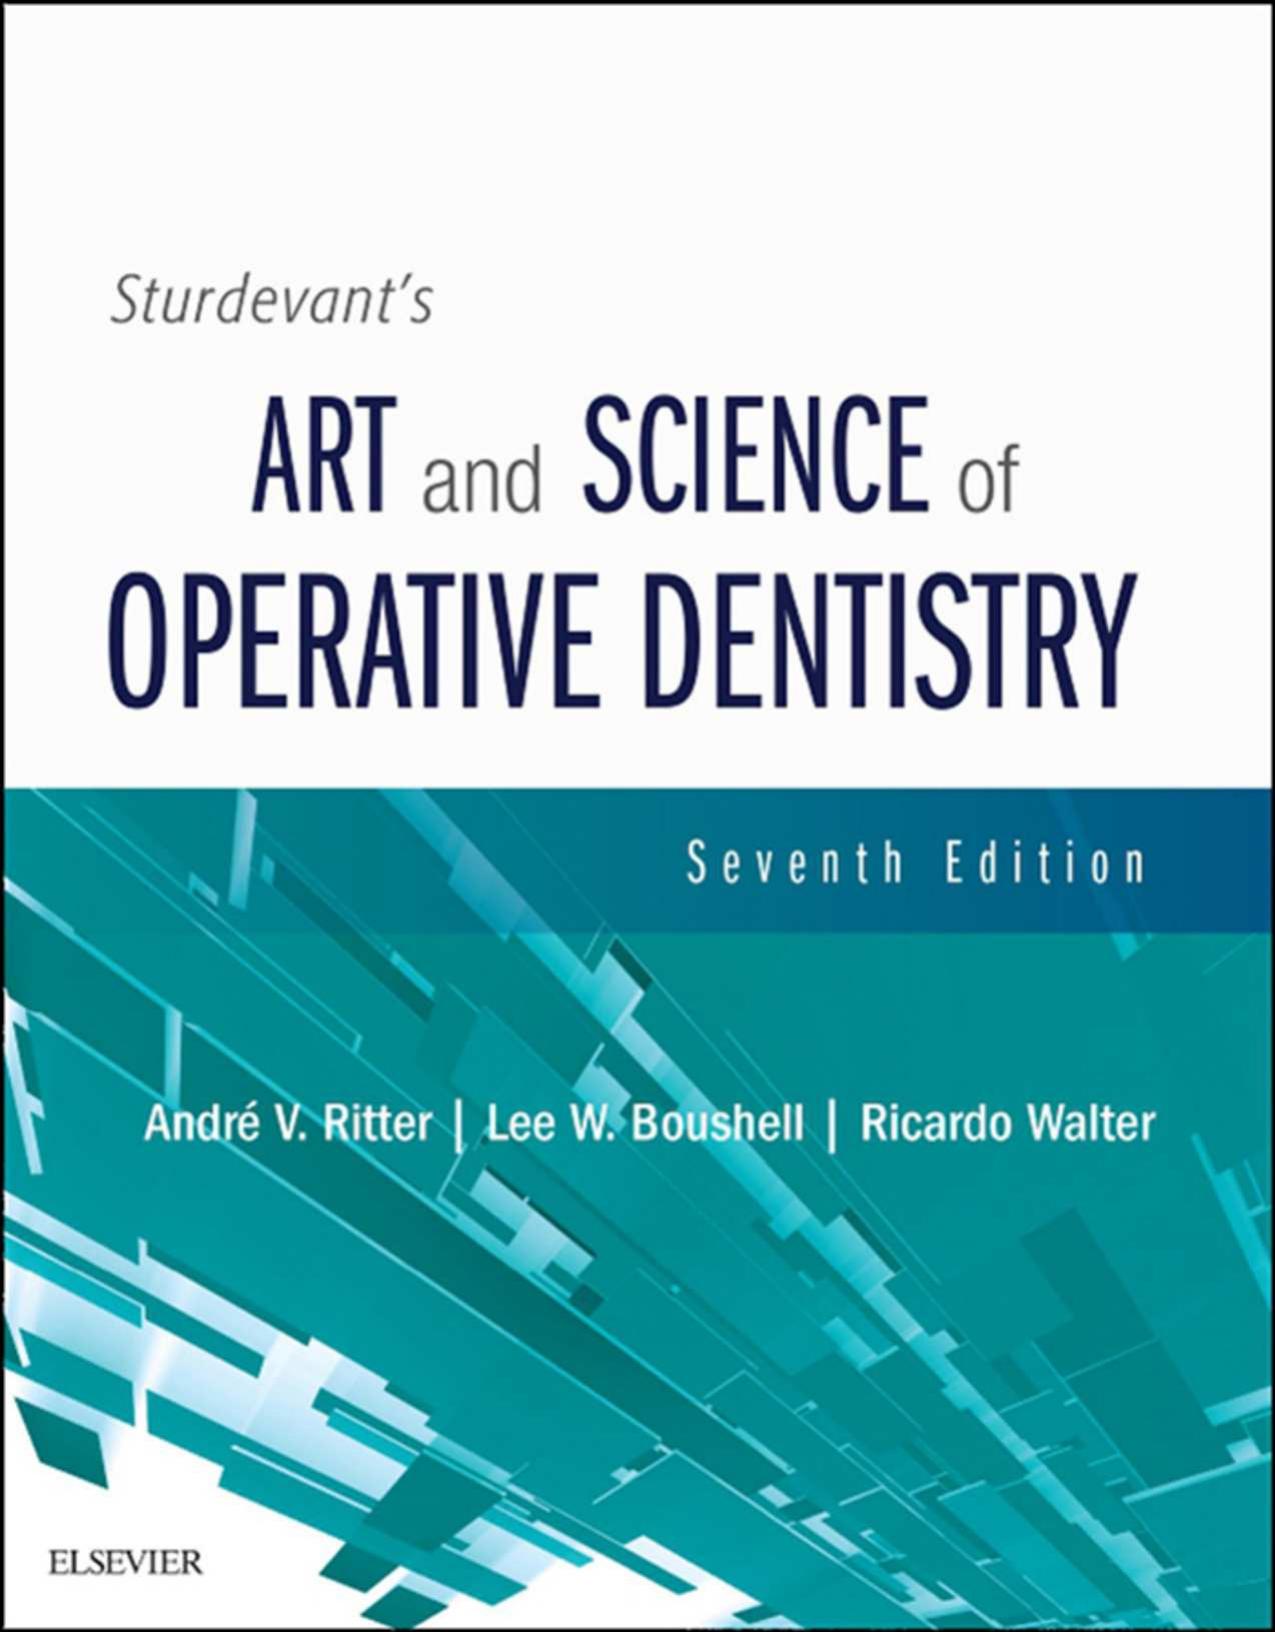 Sturdevant's Art and Science of Operative Dentistry - 7th Edition (2018)